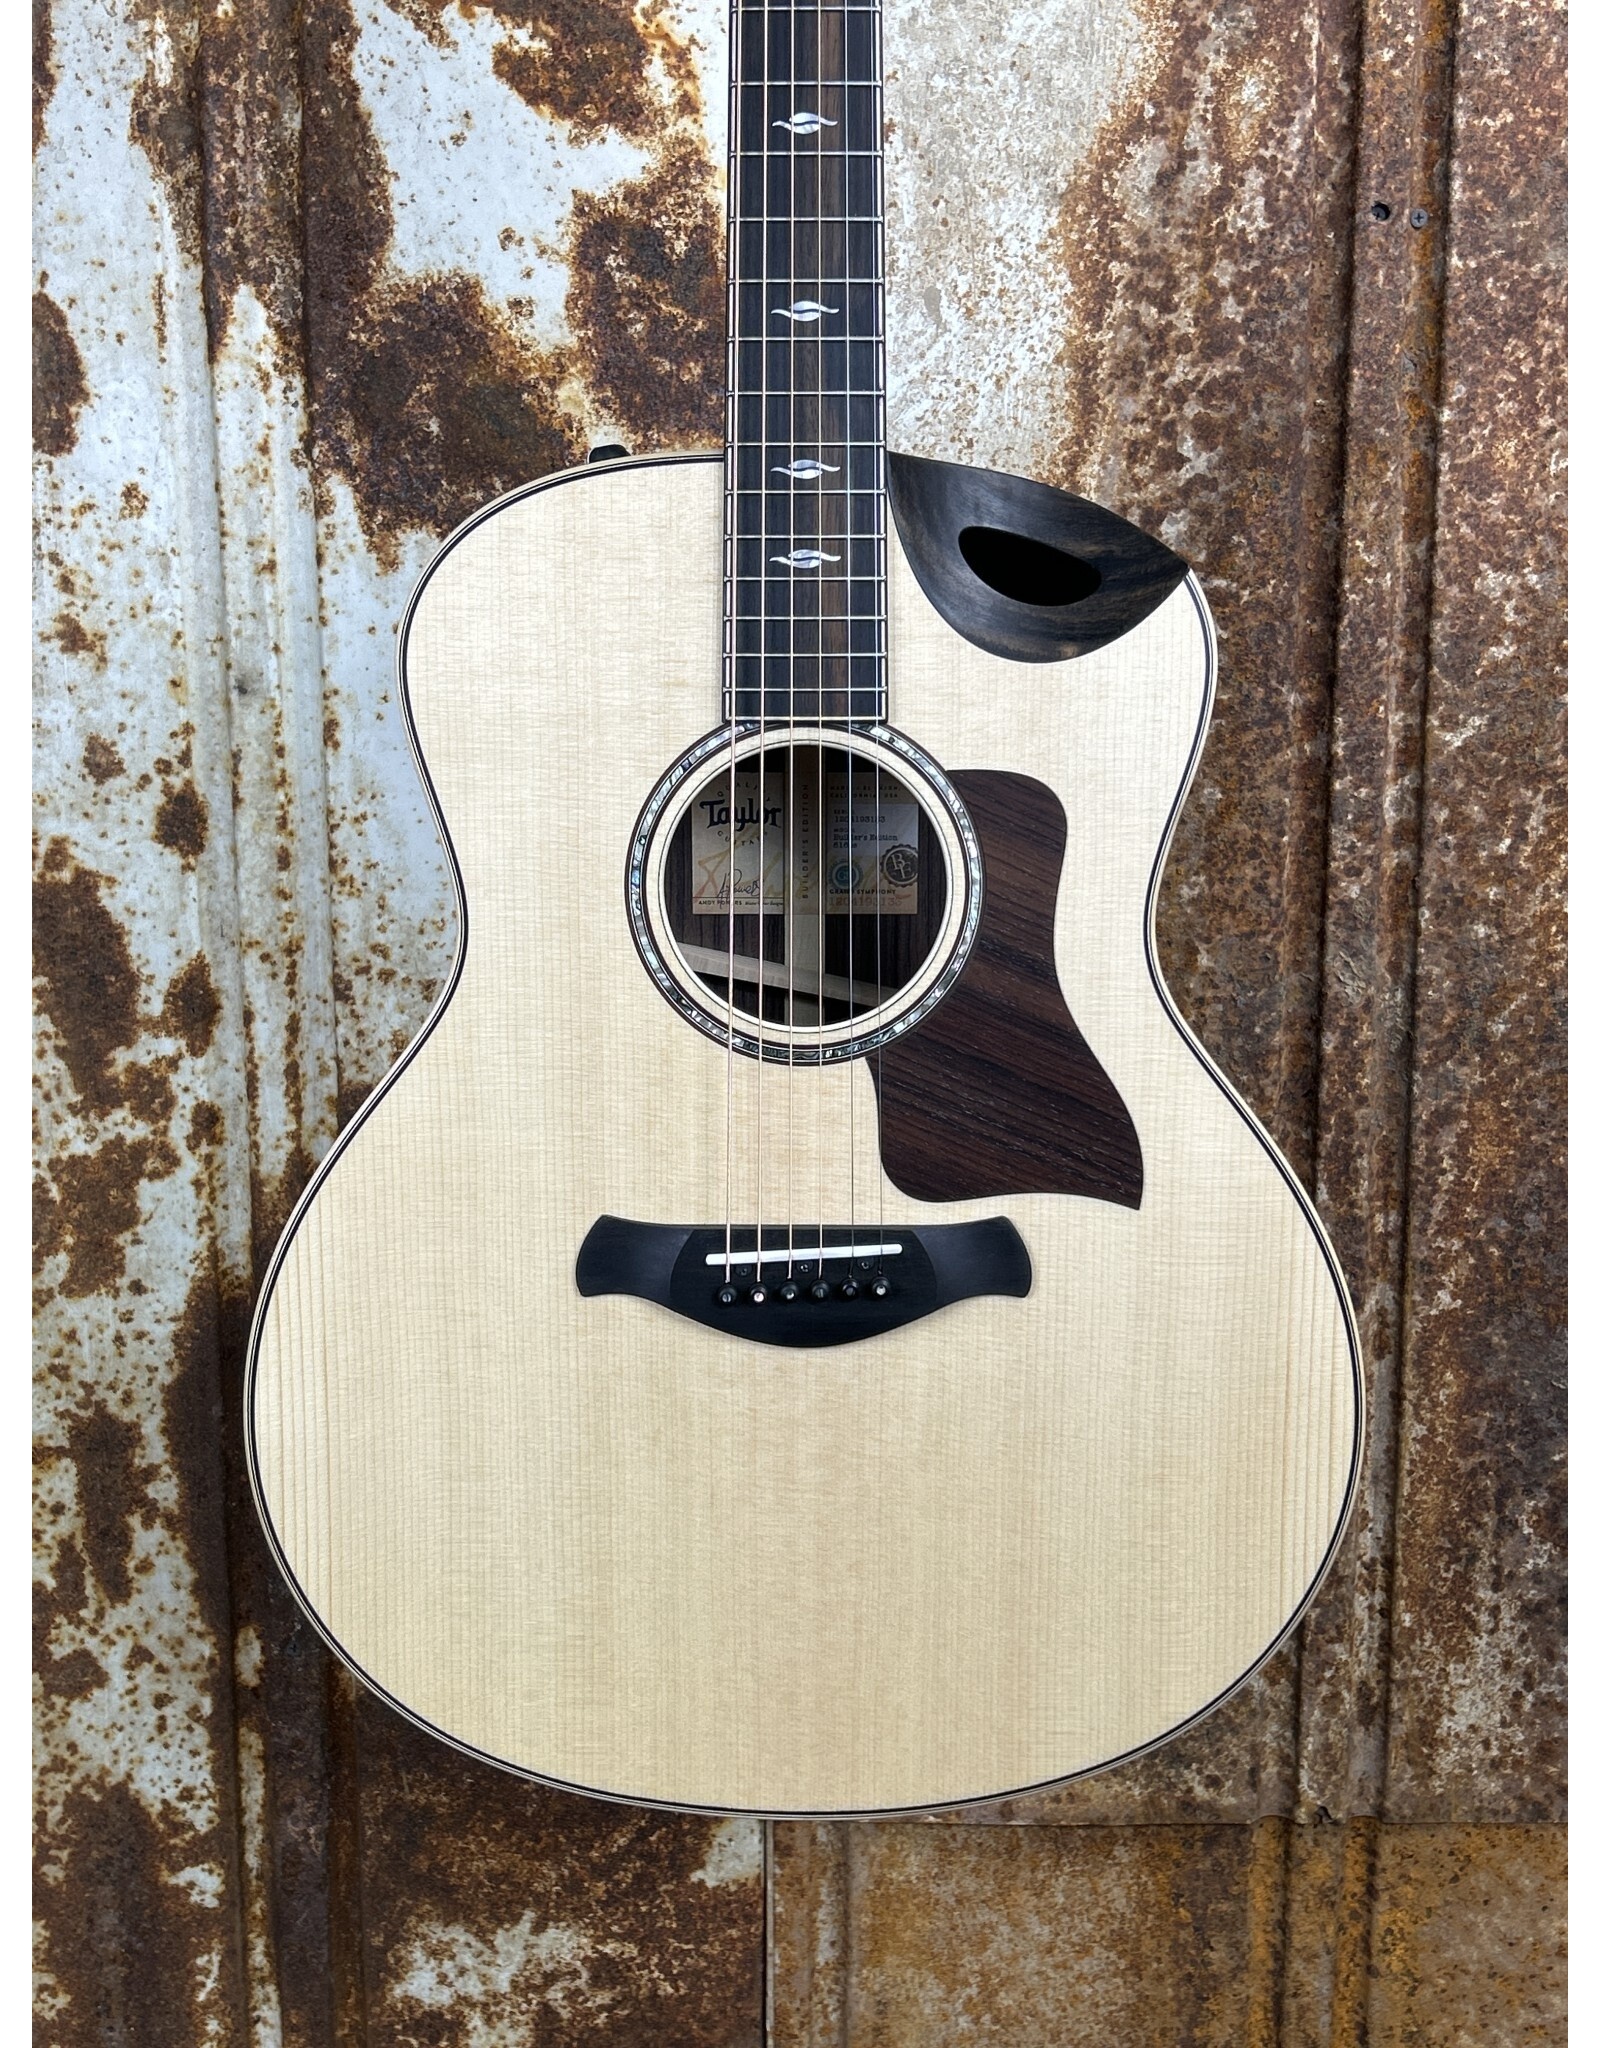 Taylor Guitars Taylor Builder's Edition 816ce Grand Symphony Indian Rosewood Acoustic-Electric